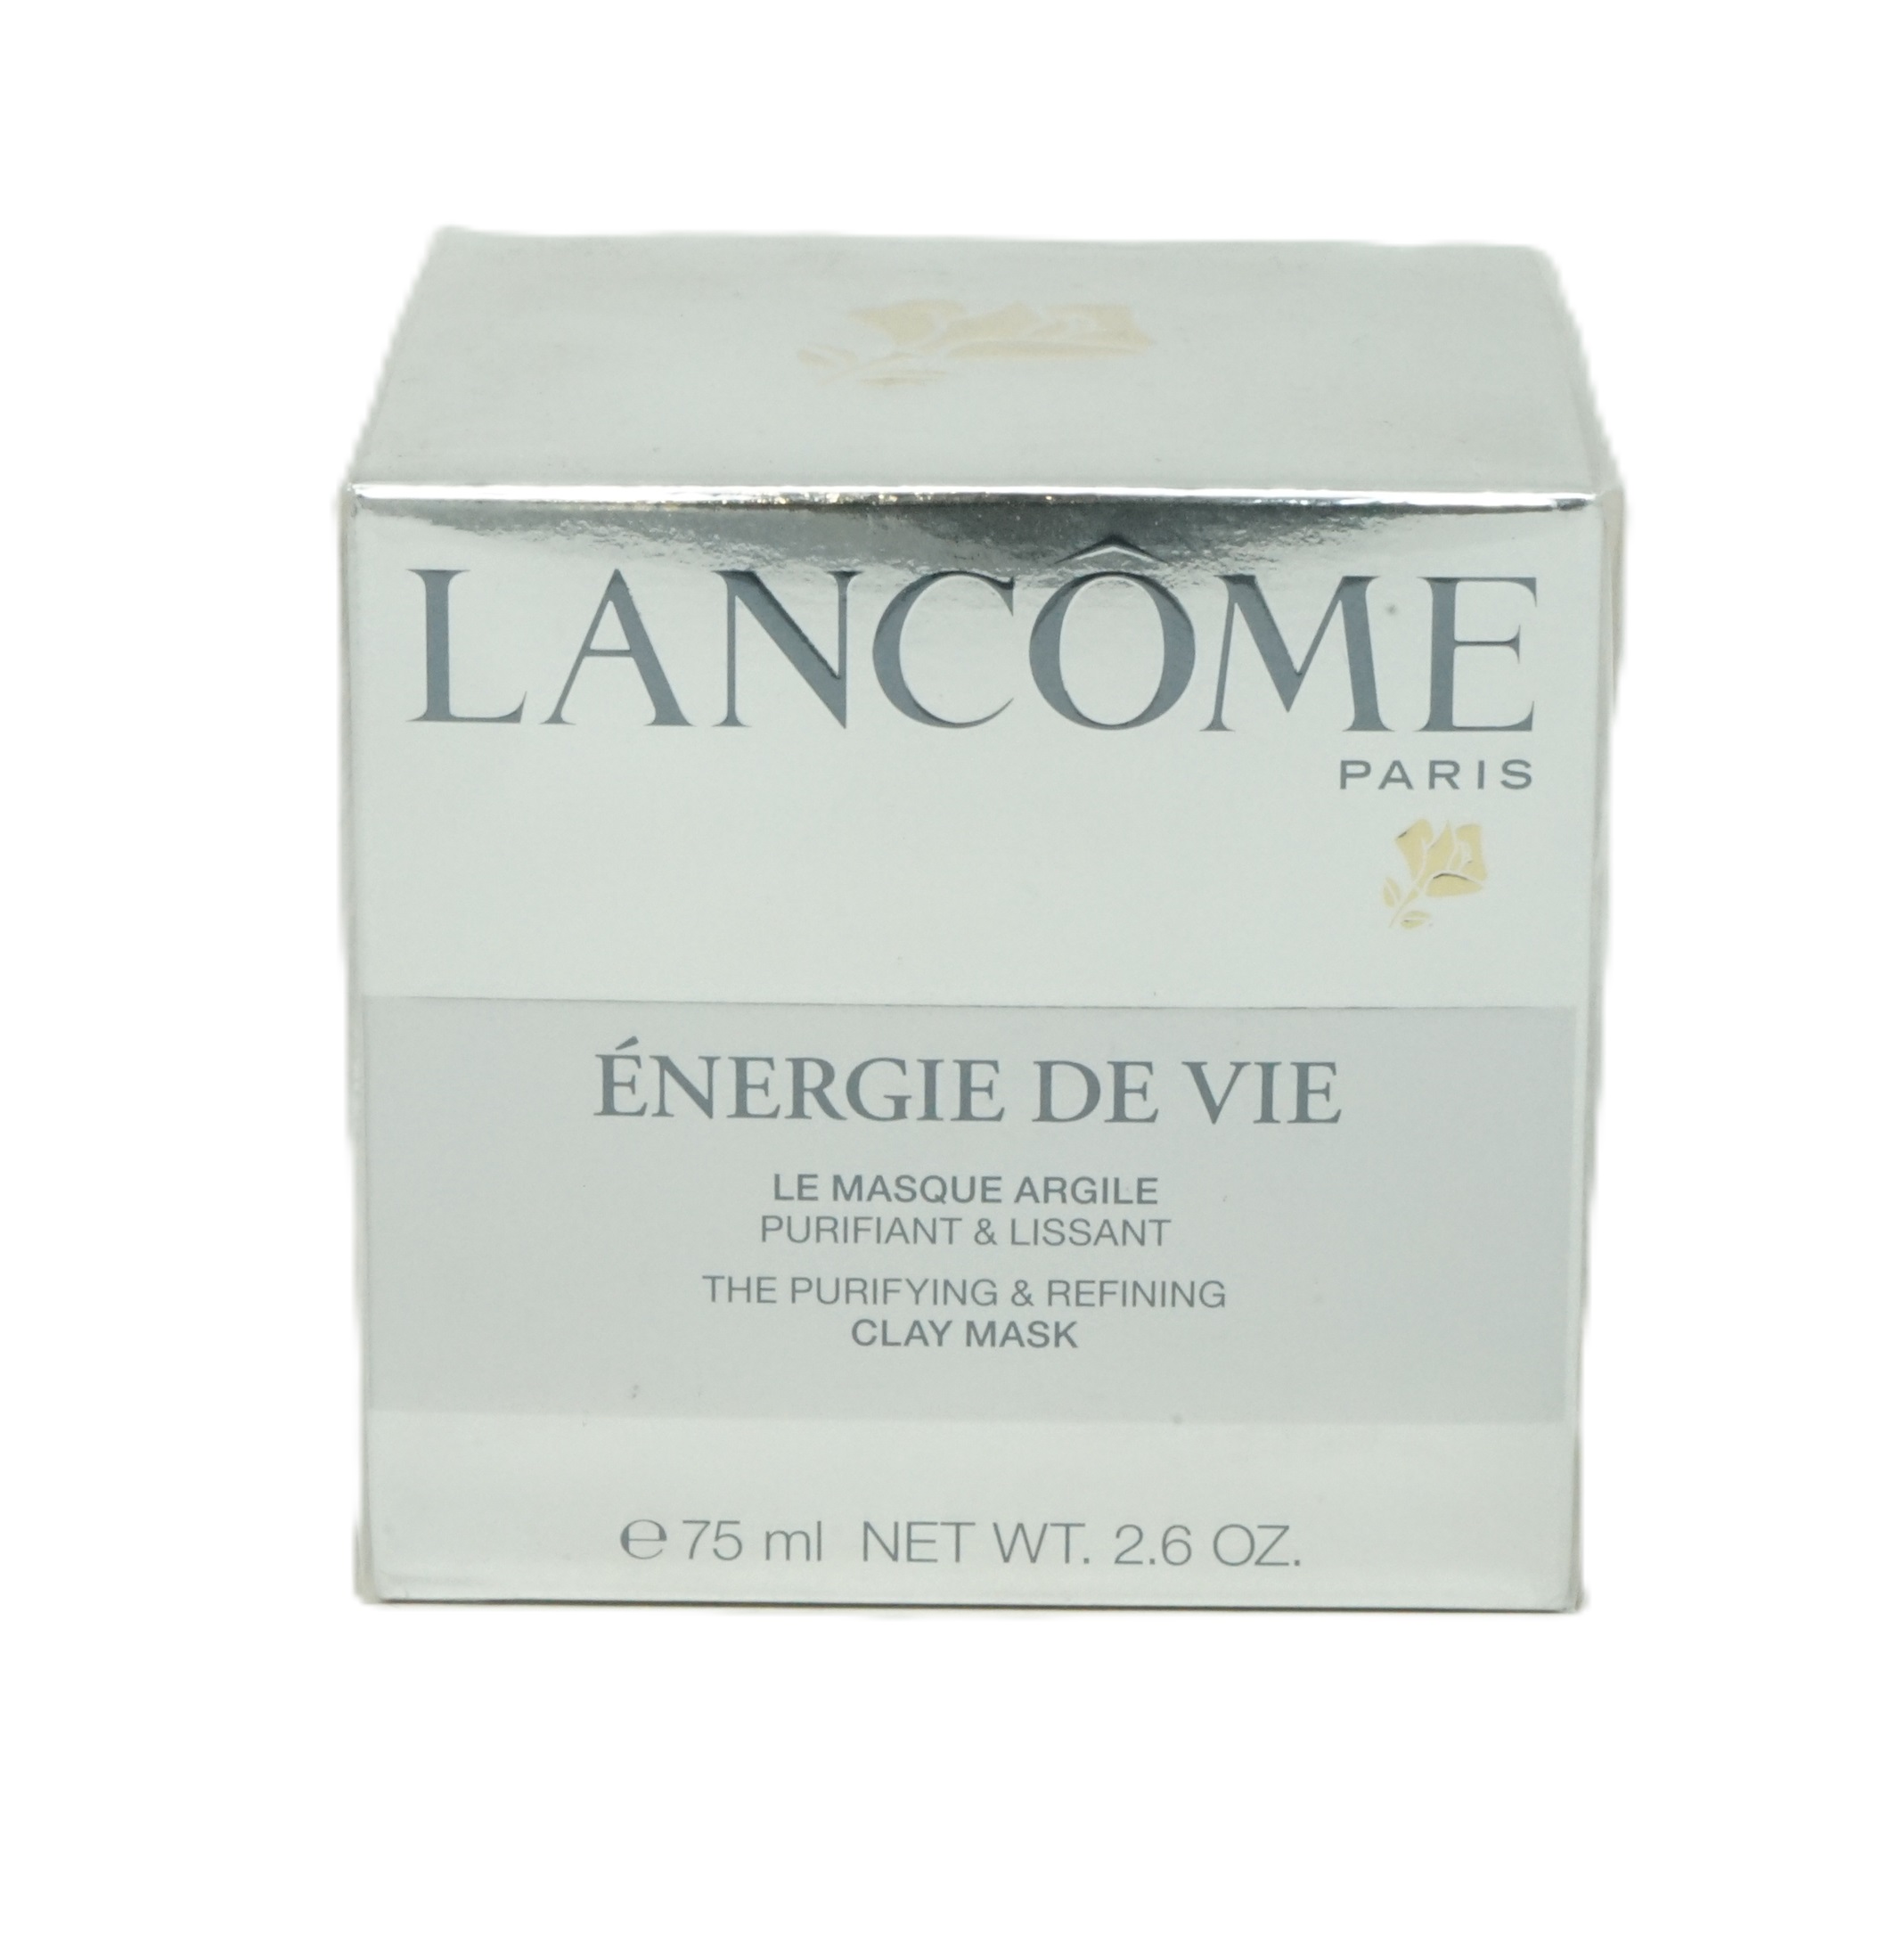 Lancome Energie de Vie the purifying & refining Clay Mask 75ml